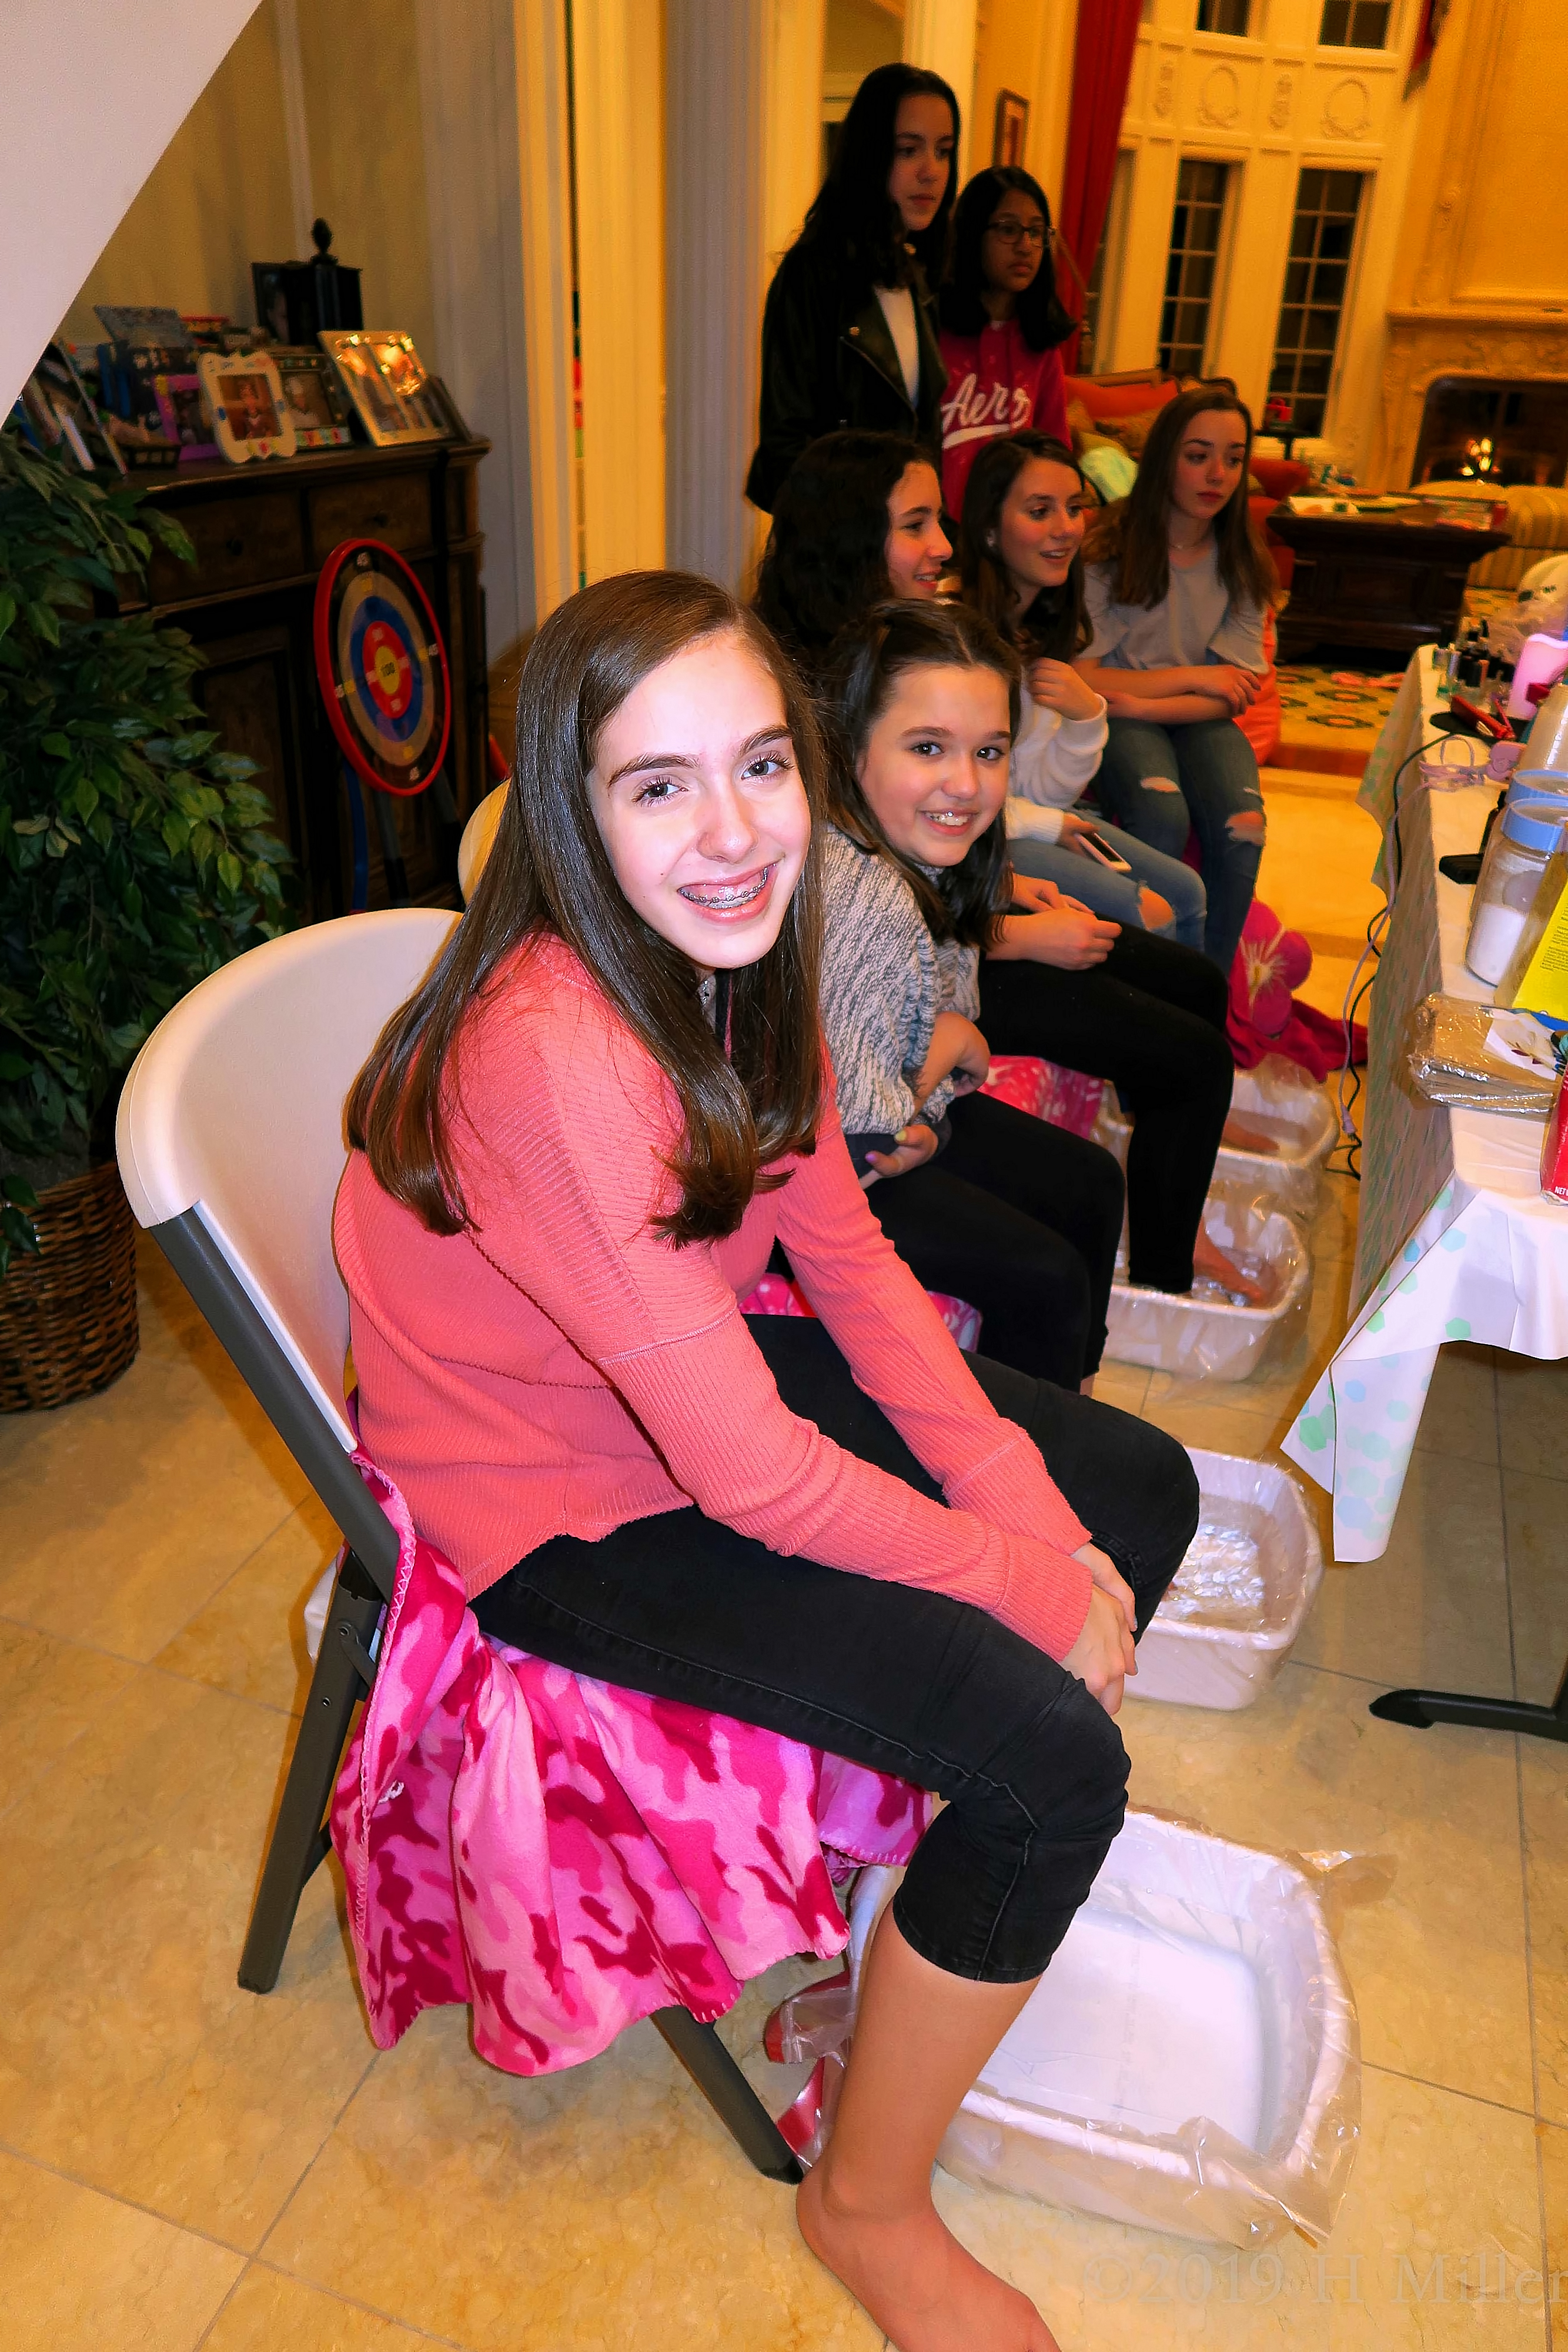 Pedicures Are So Much Fun Together! 